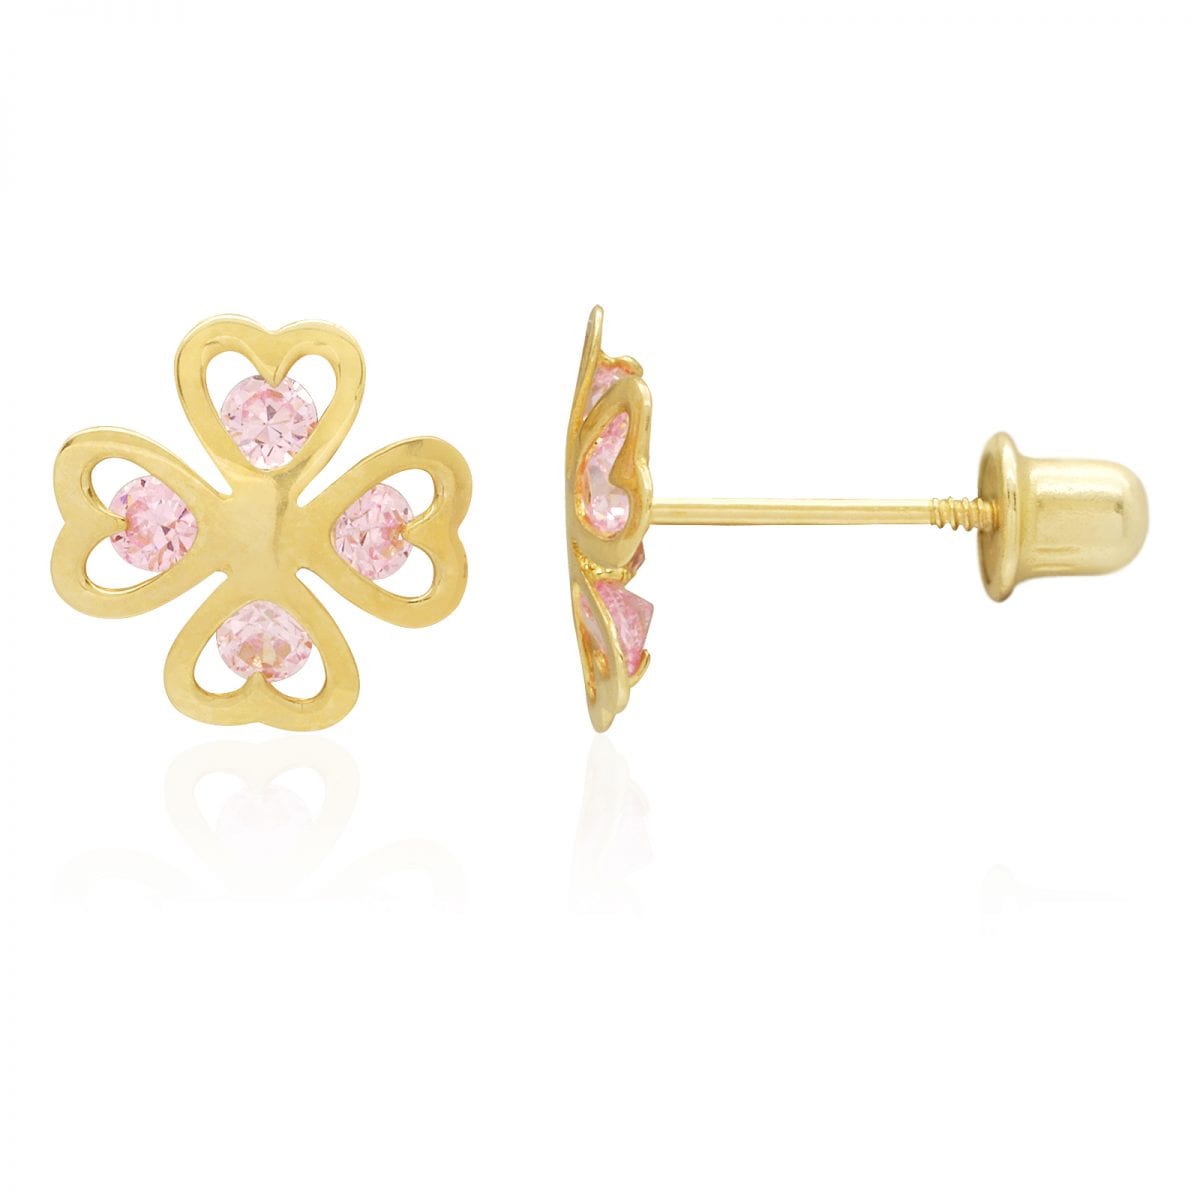 14k Yellow Gold Simulated Pink Tourmaline Lucky Clover Screwback Stud Earrings